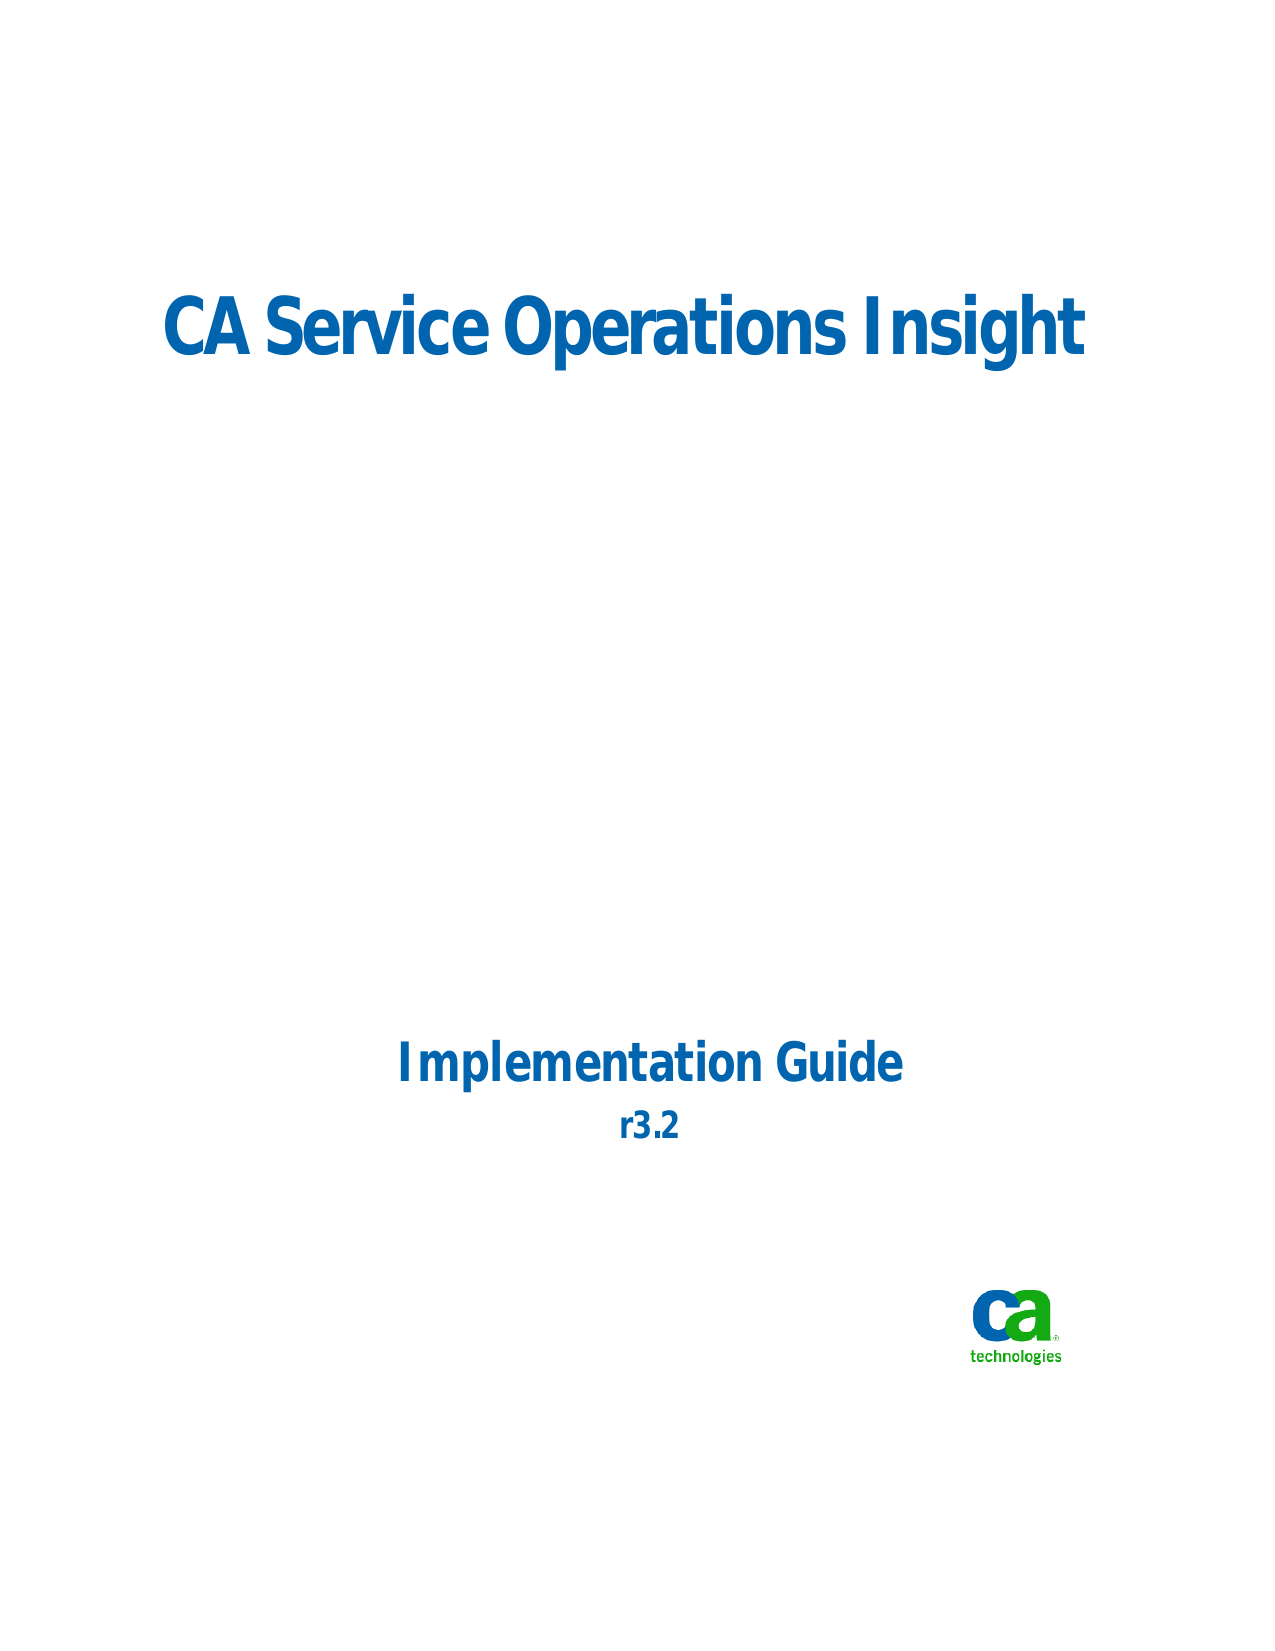 Ca Service Operations Insight Implementation Guide